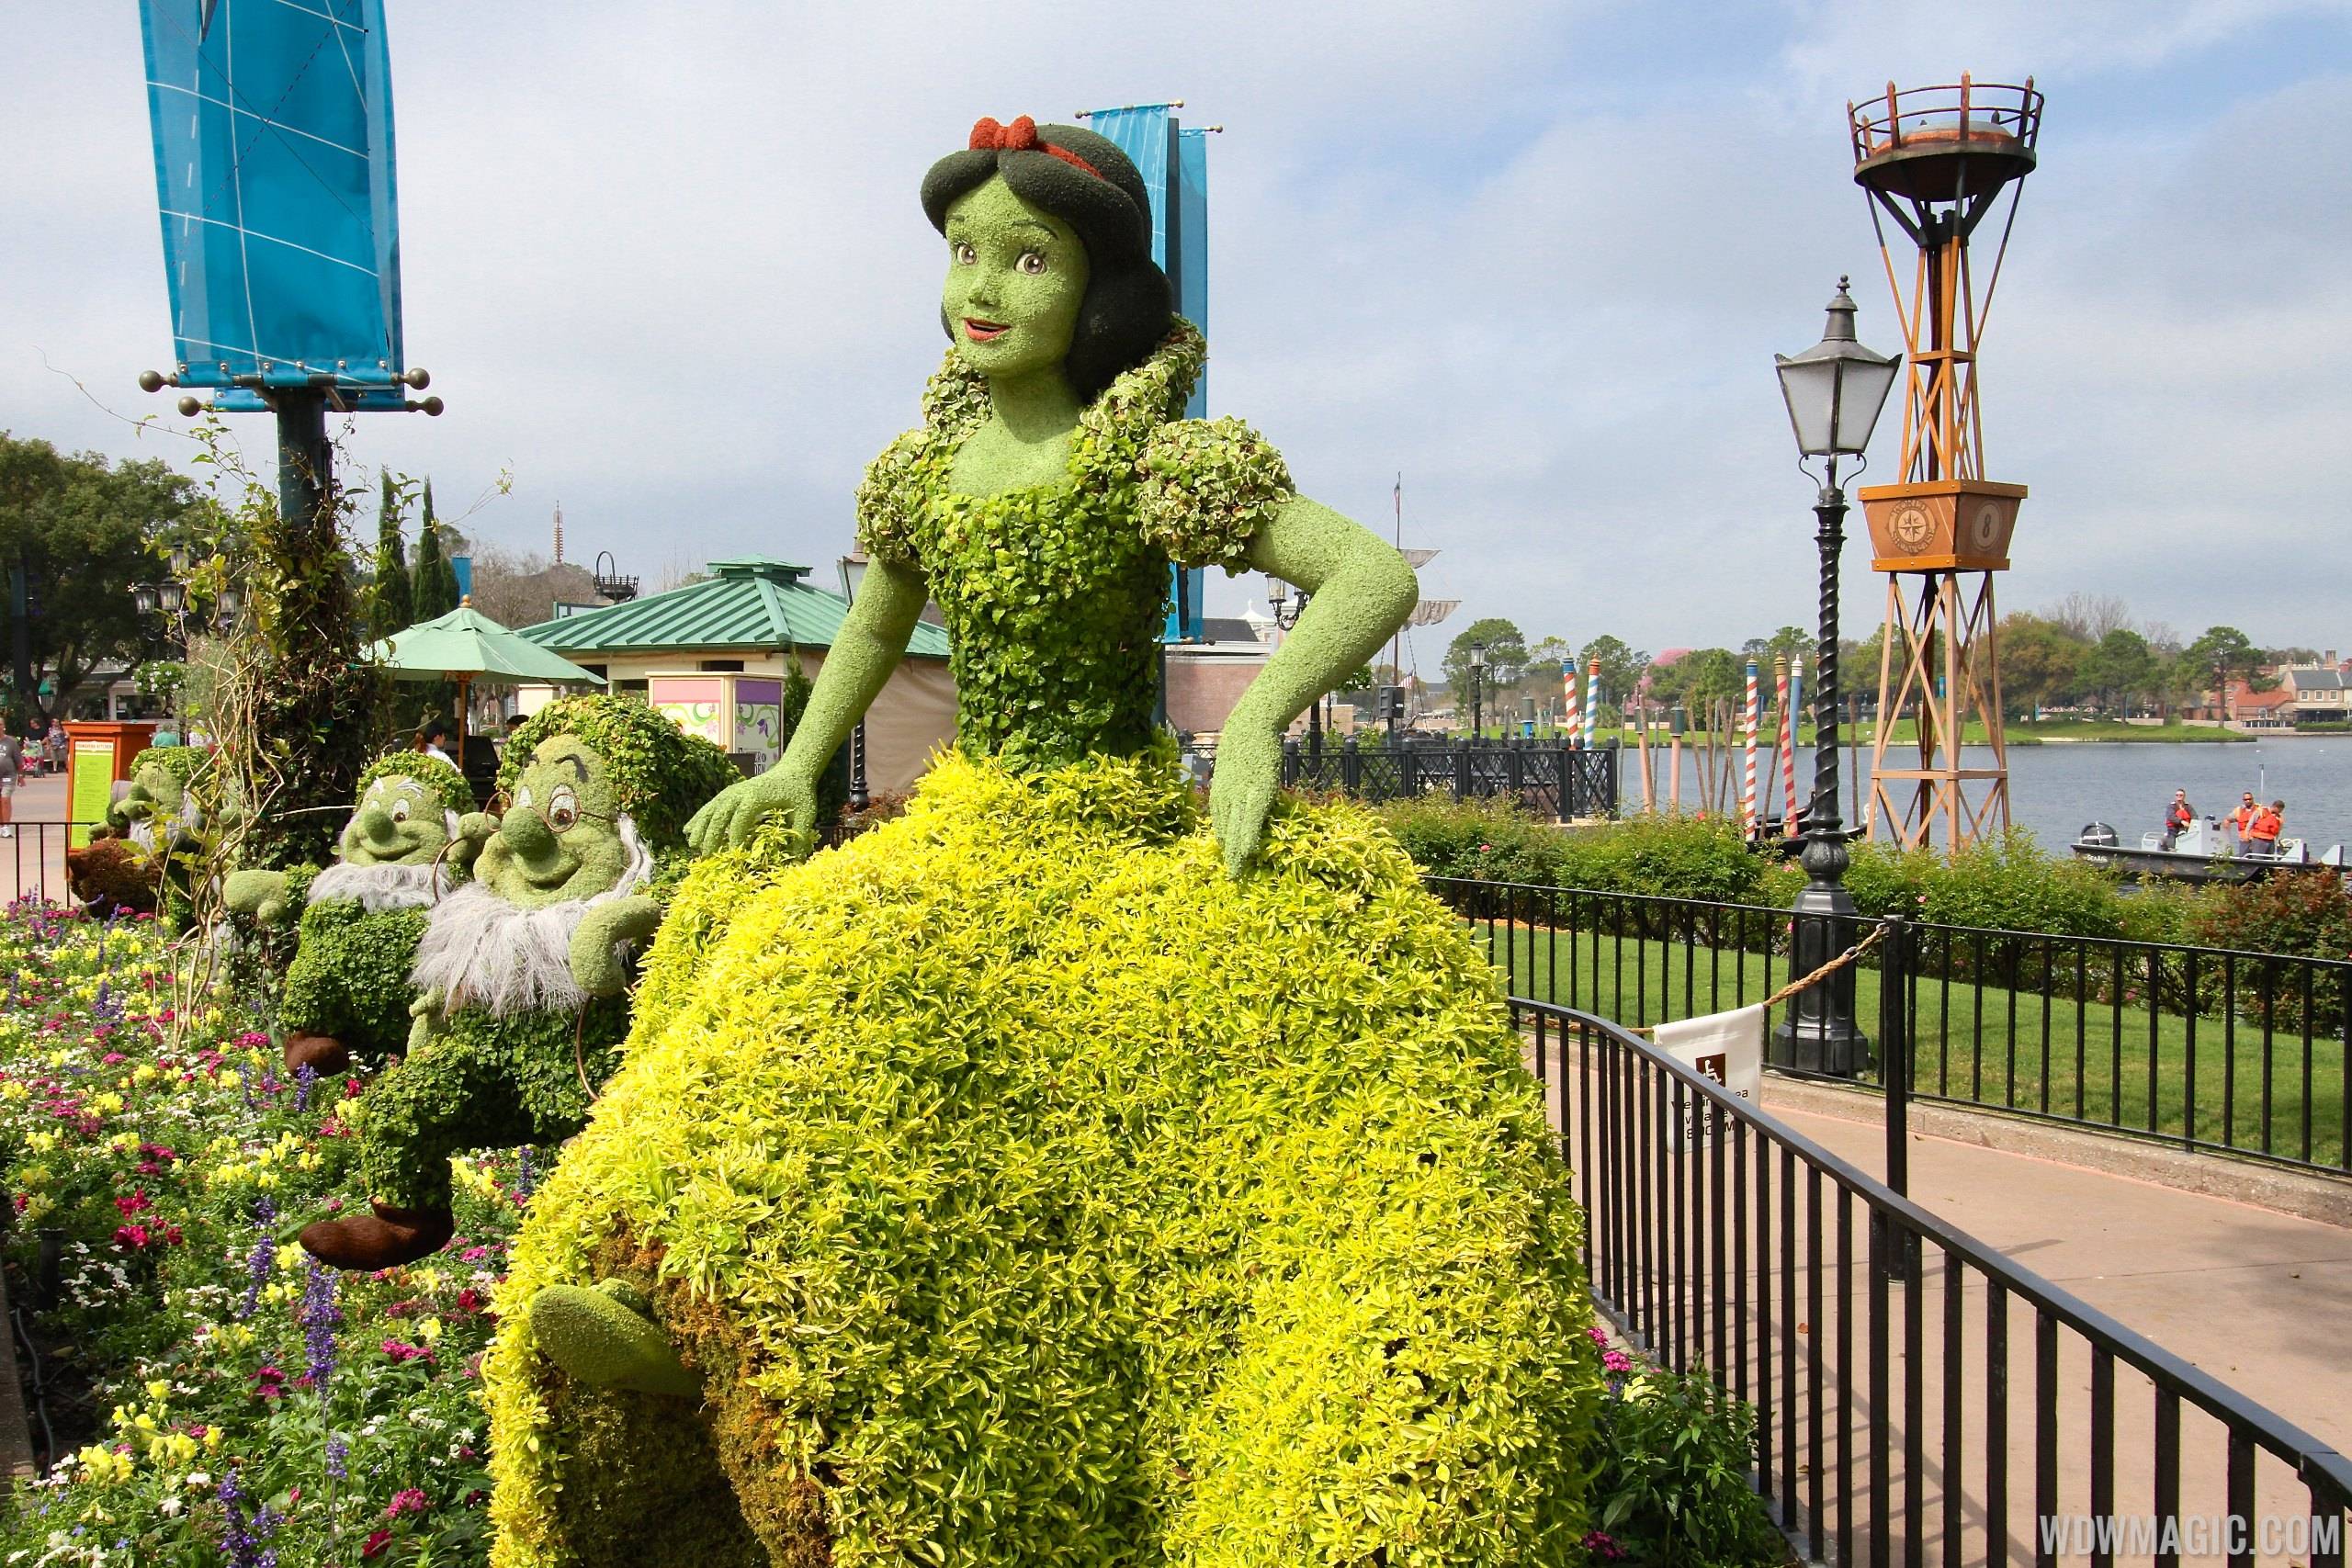 2014 Epcot Flower and Garden Festival - Snow White and the Seven Dwarfs topiary